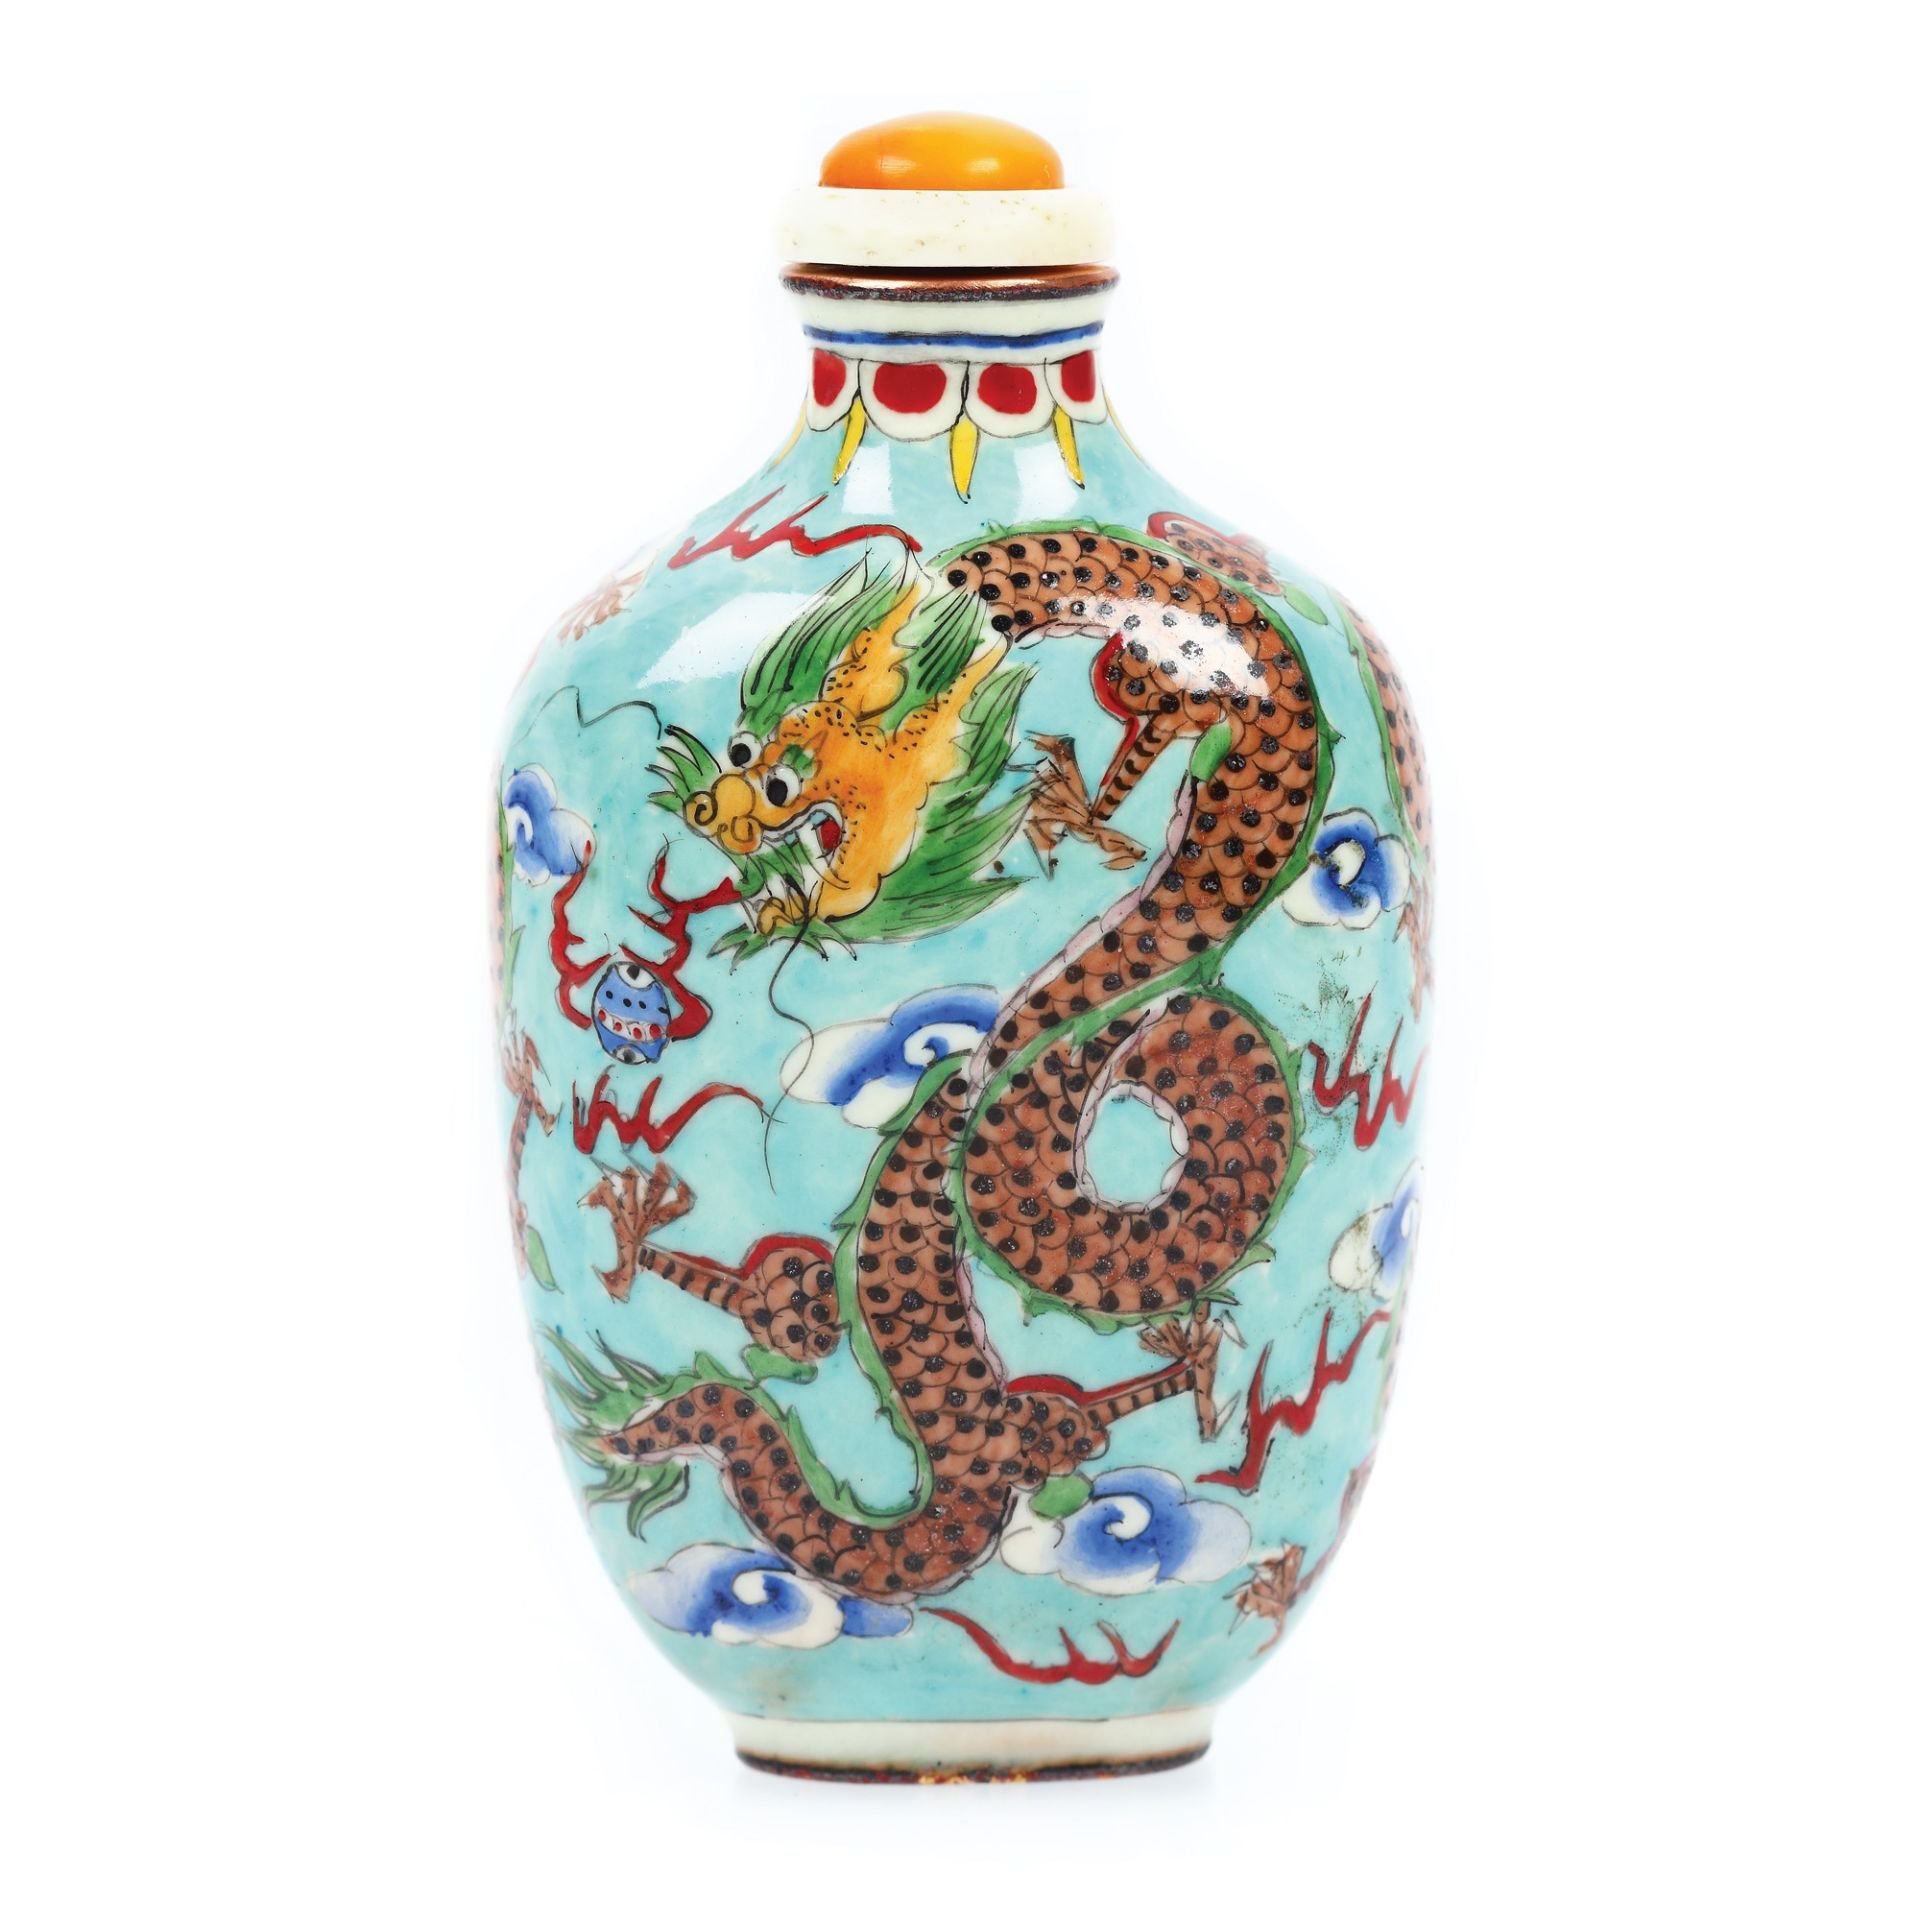 Recipient for sniffing, Beijing enamel, ivory and amber stopper, decorated with dragons hunting pear